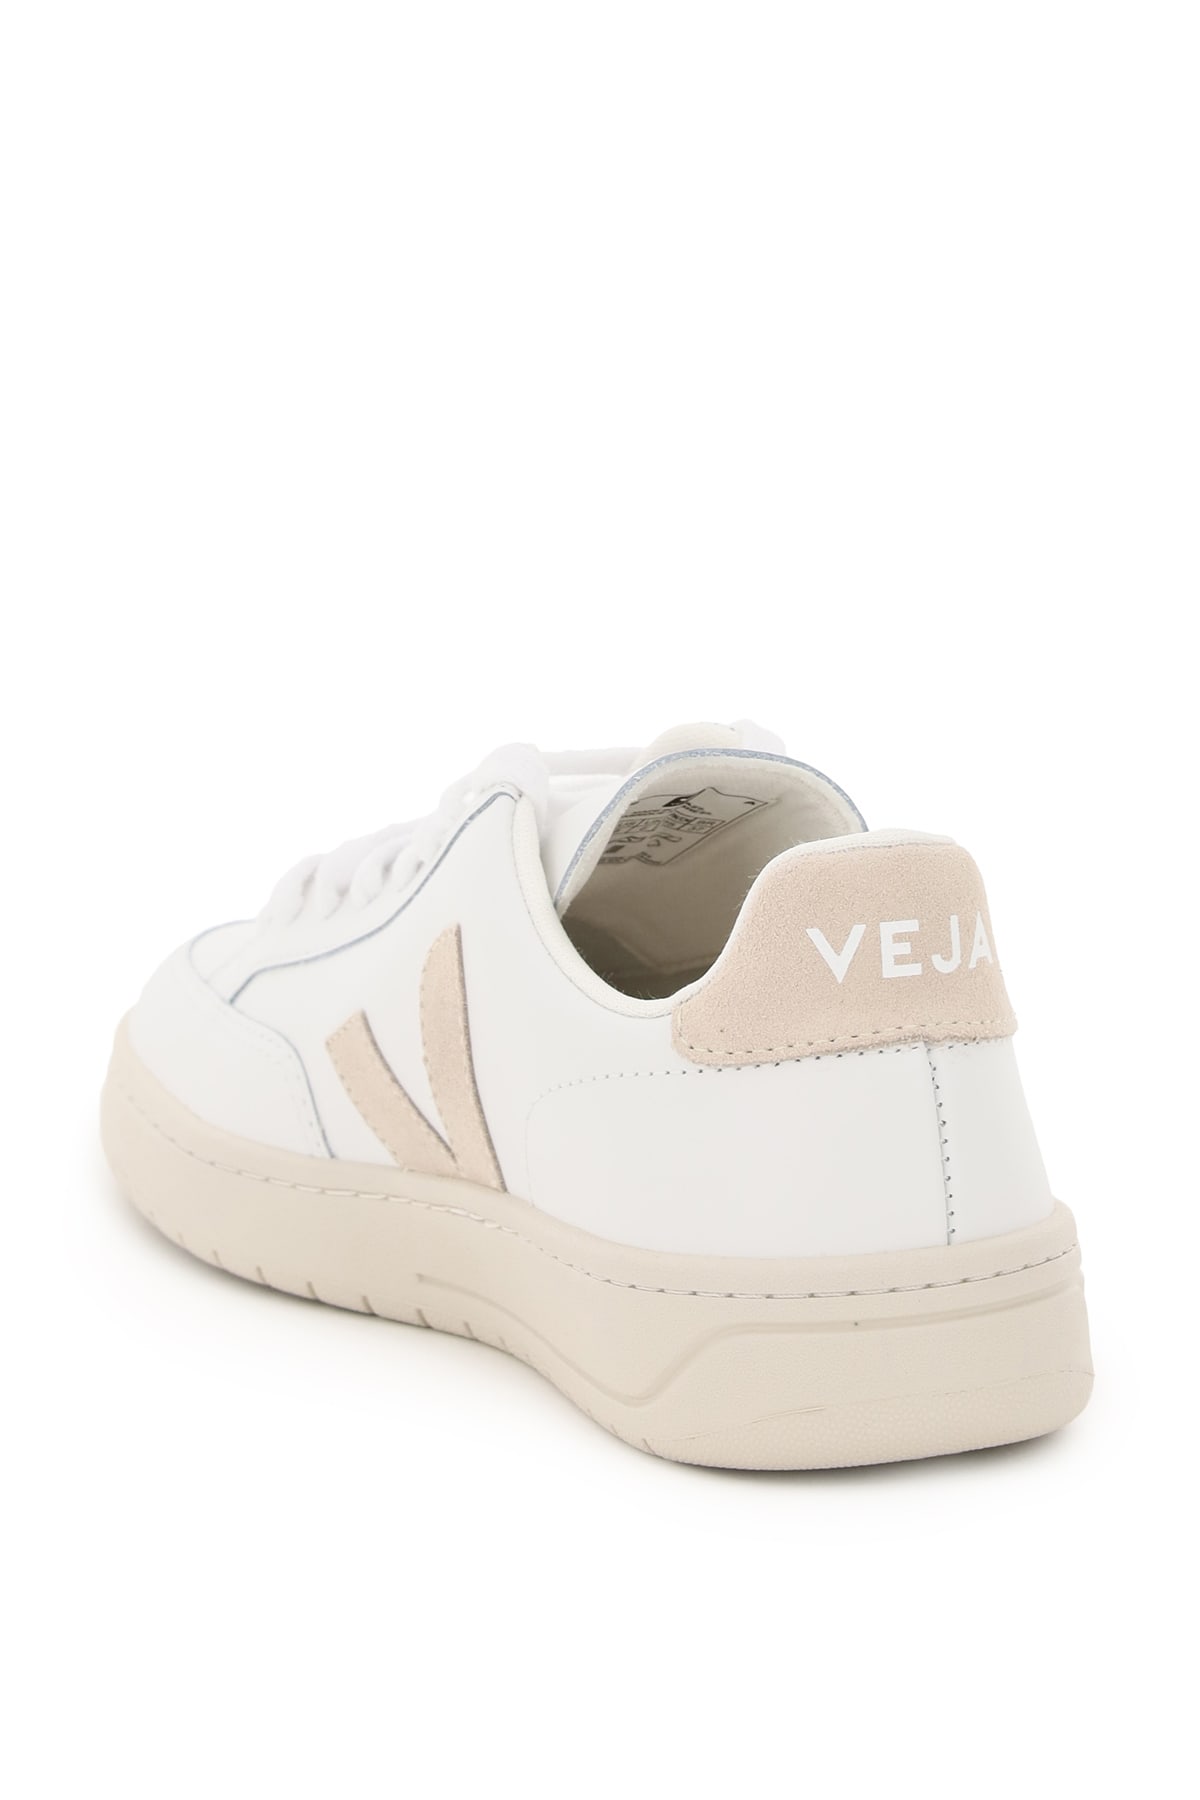 Shop Veja Leather V-12 Sneakers In Extra White Sable (beige)